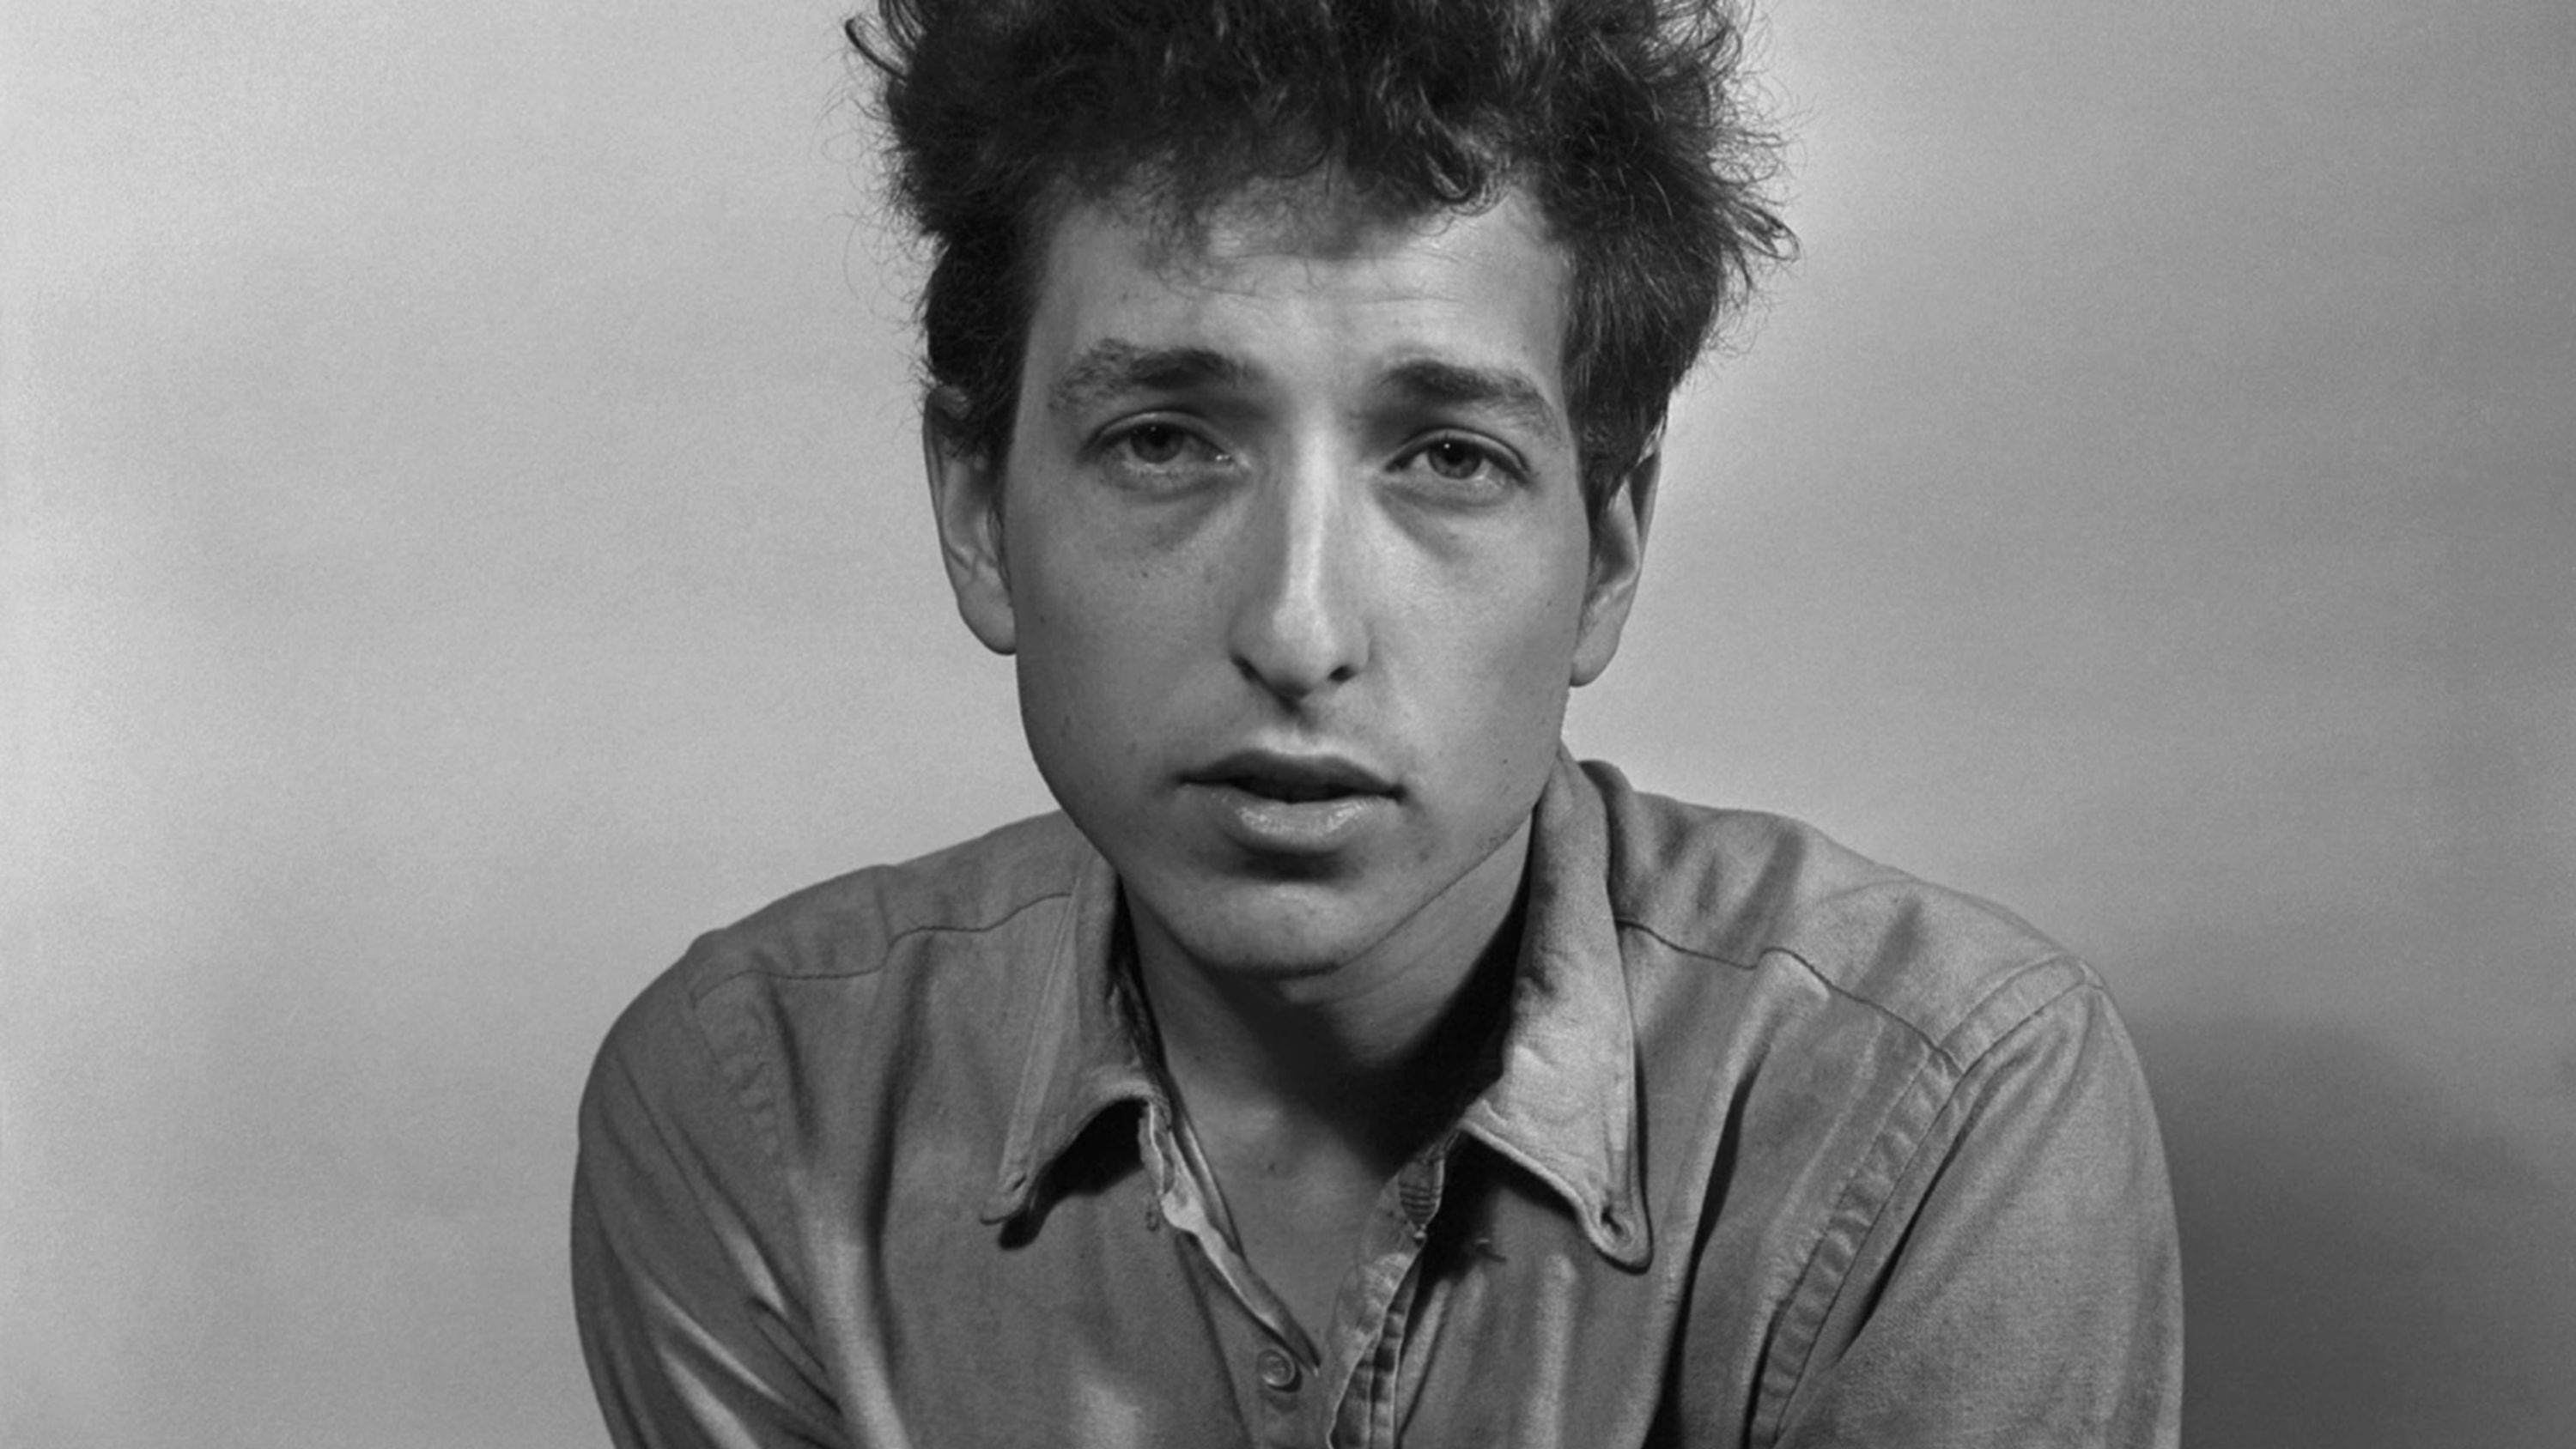 Singer and songwriter Bob Dylan is photographed in 1963. He turns 80 on Monday, May 24.